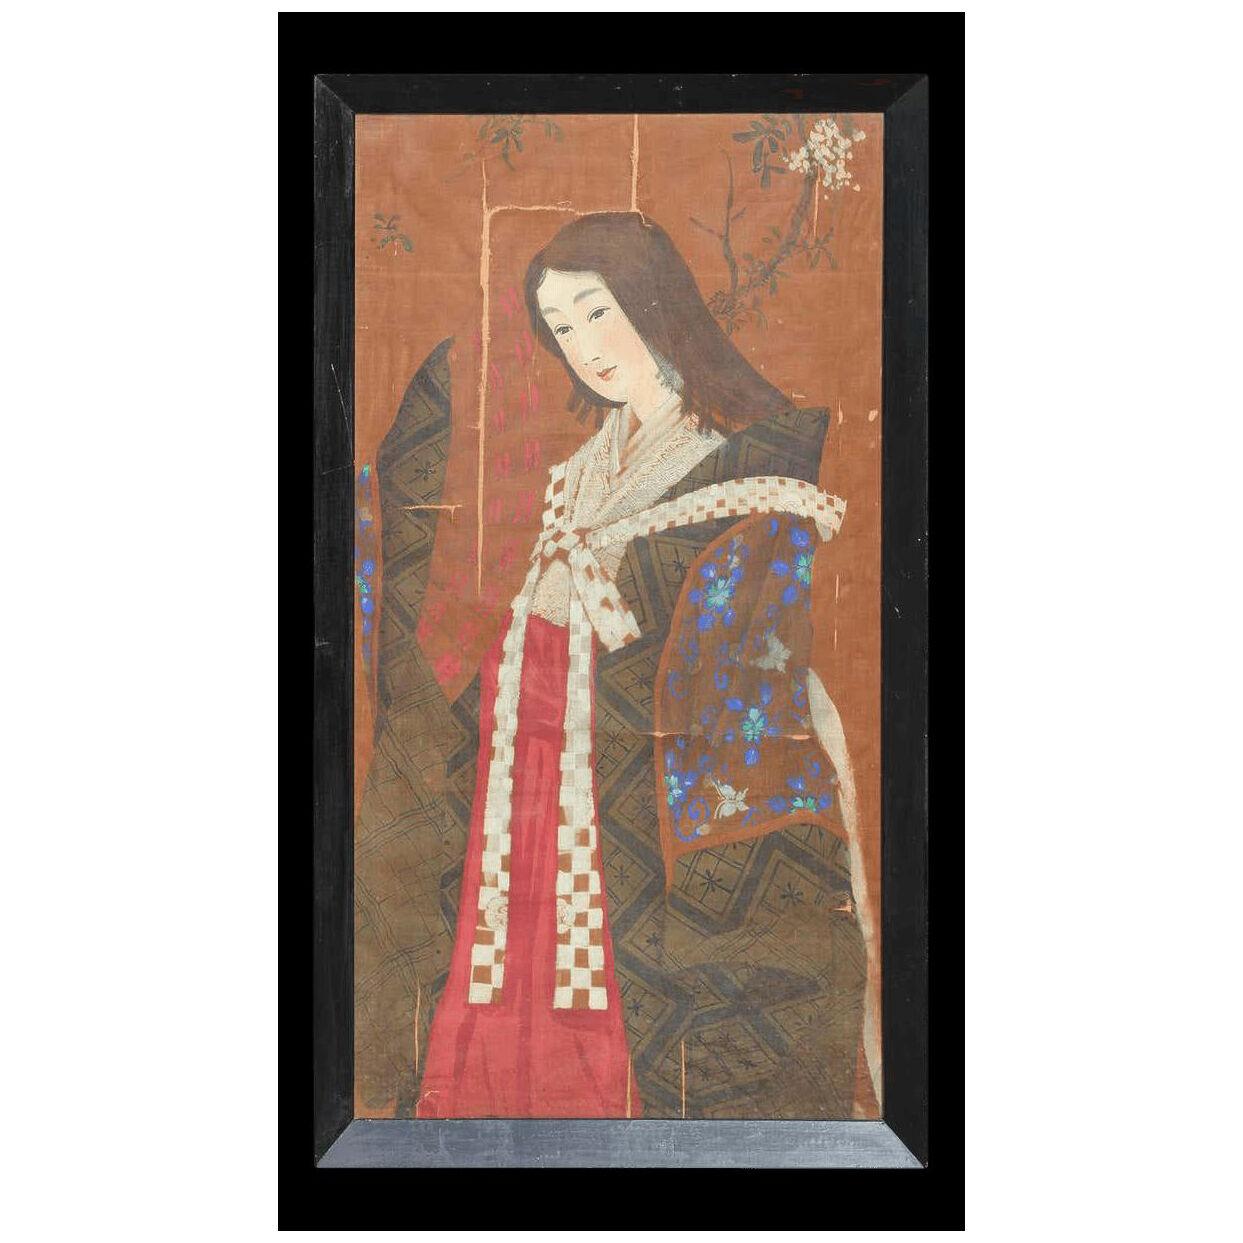 Japanese Geisha or Miko in Kimono with Fan Painting on Silk